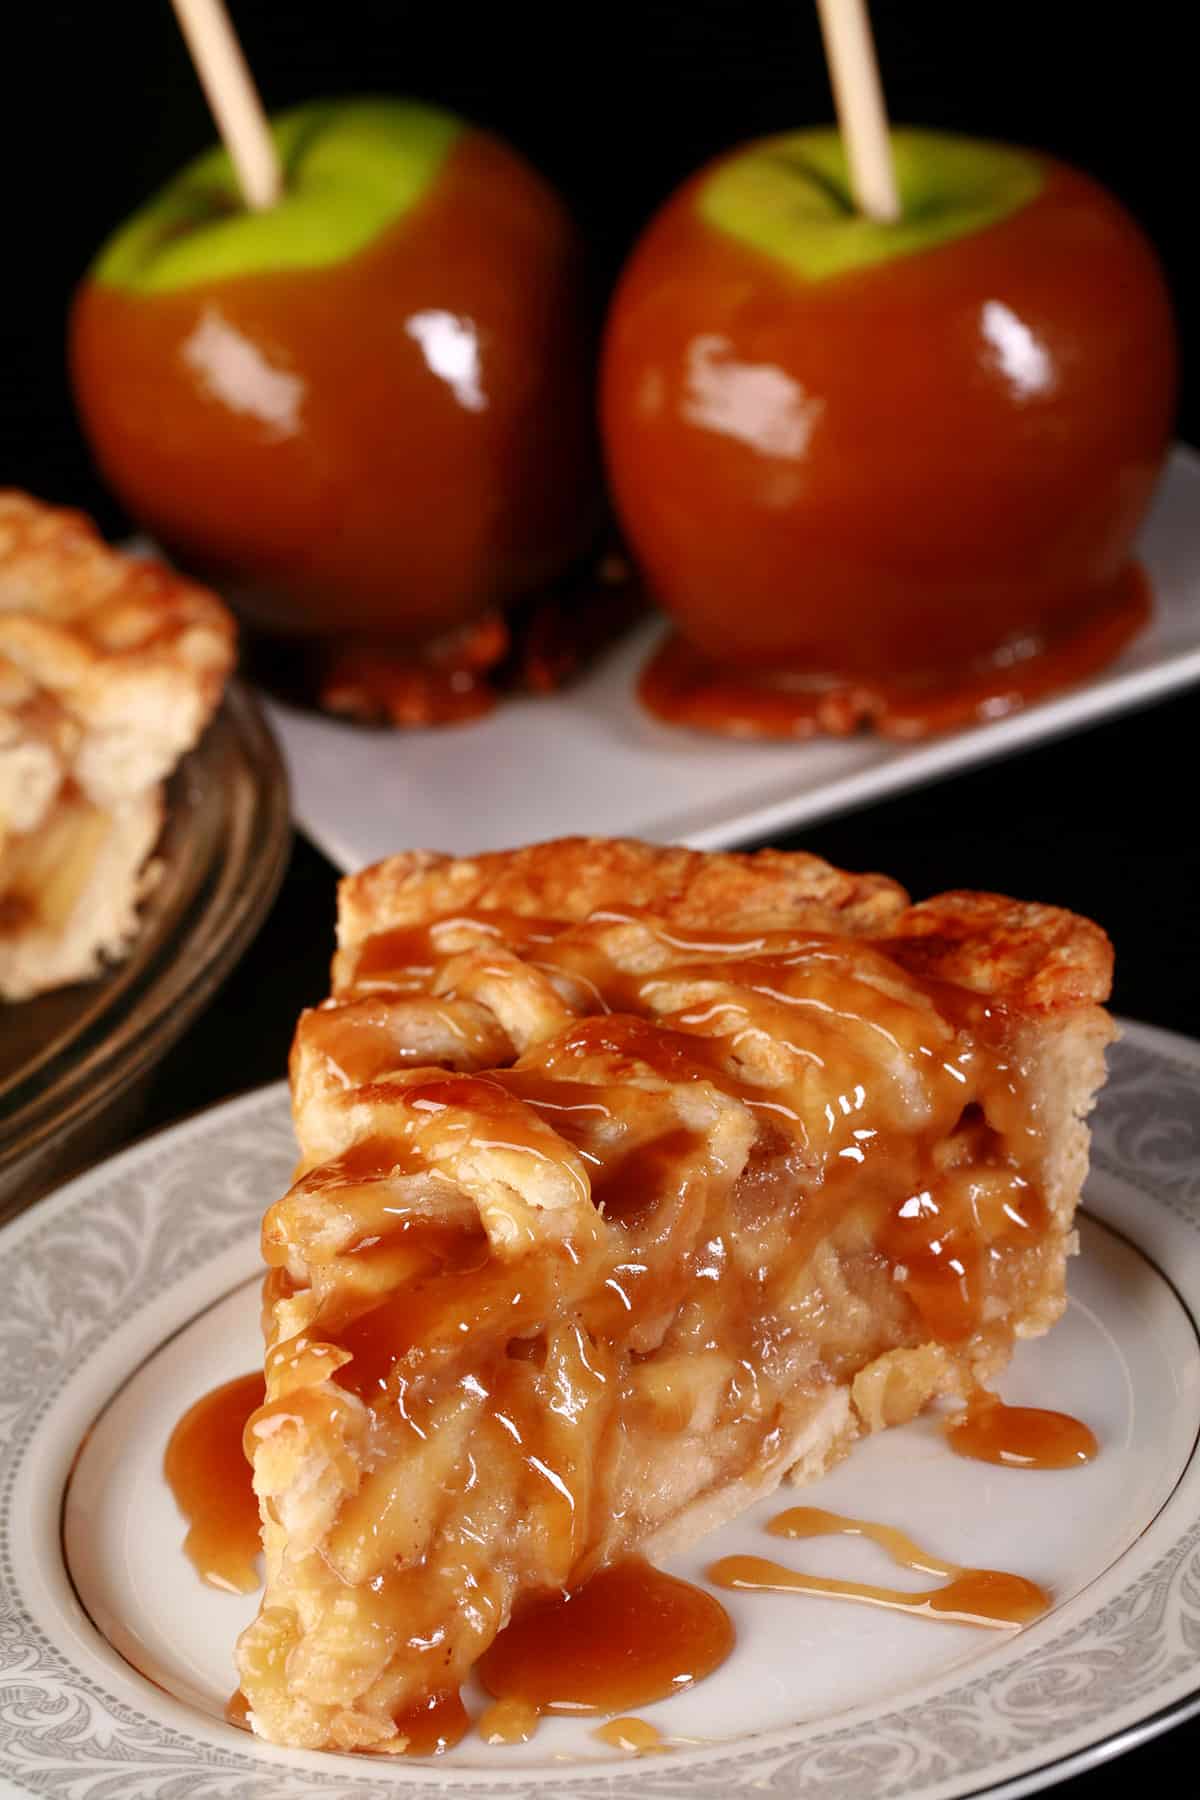 A slice of maple caramel apple pie on a plate in front of the rest of the pie and 2 caramel apples..